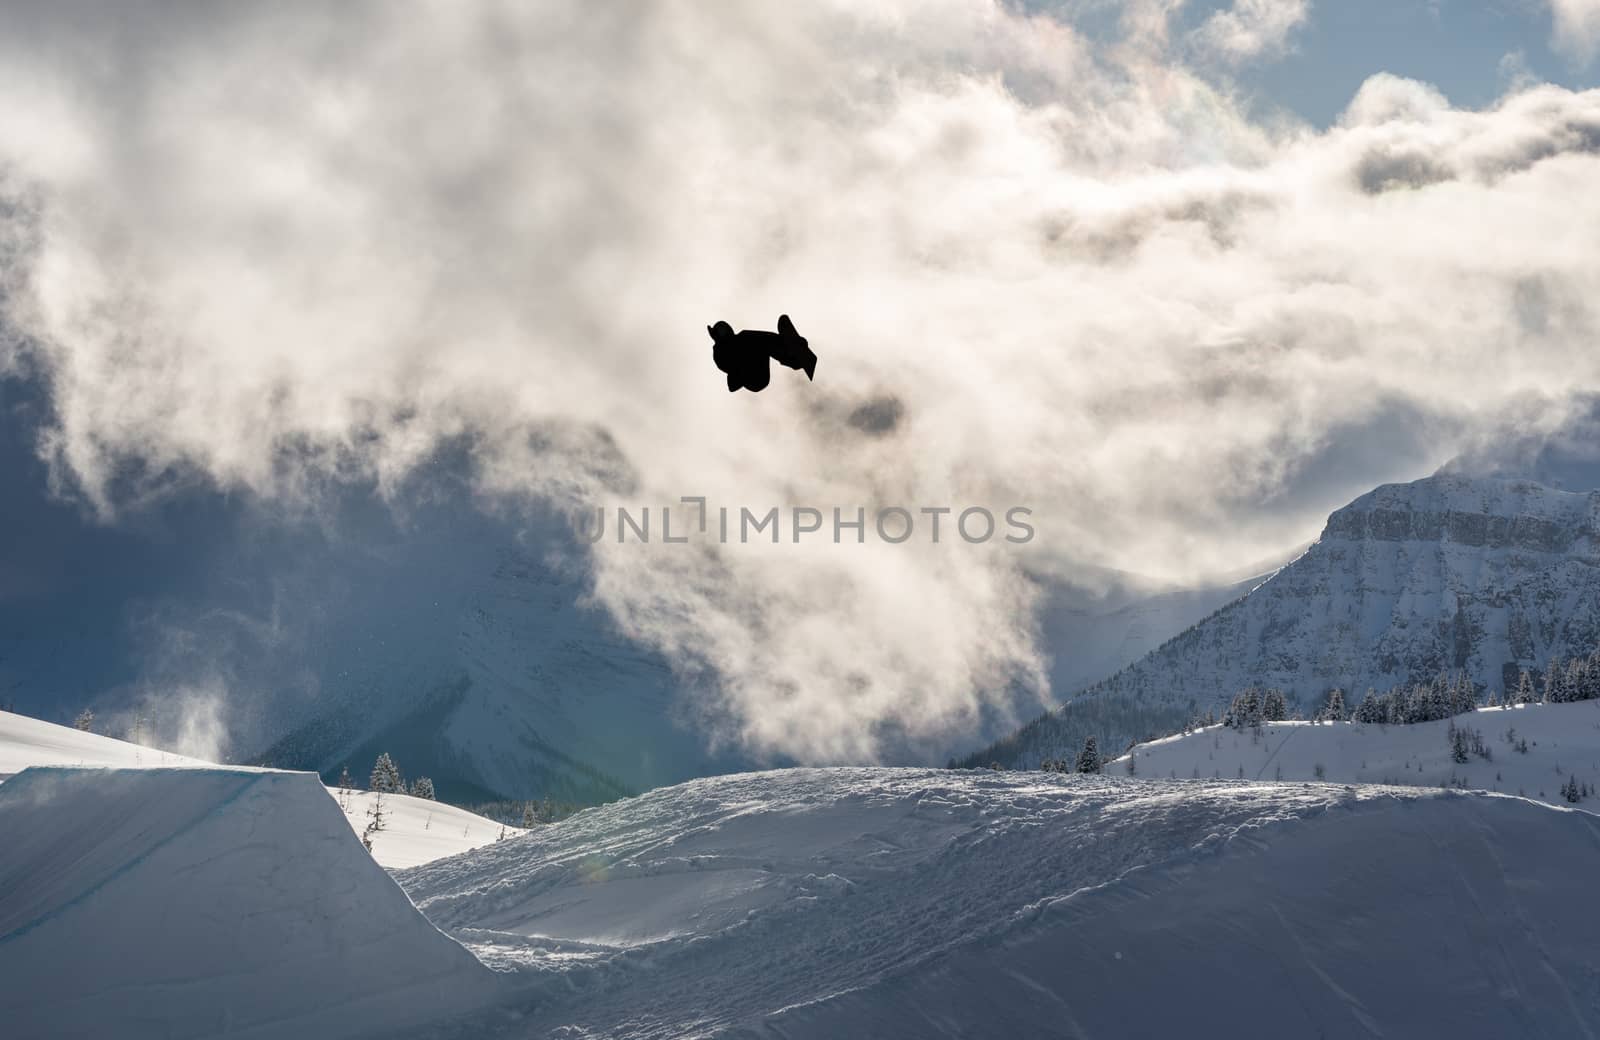 Snowboarder performing flip off a large jump in the mountains by TSLPhoto